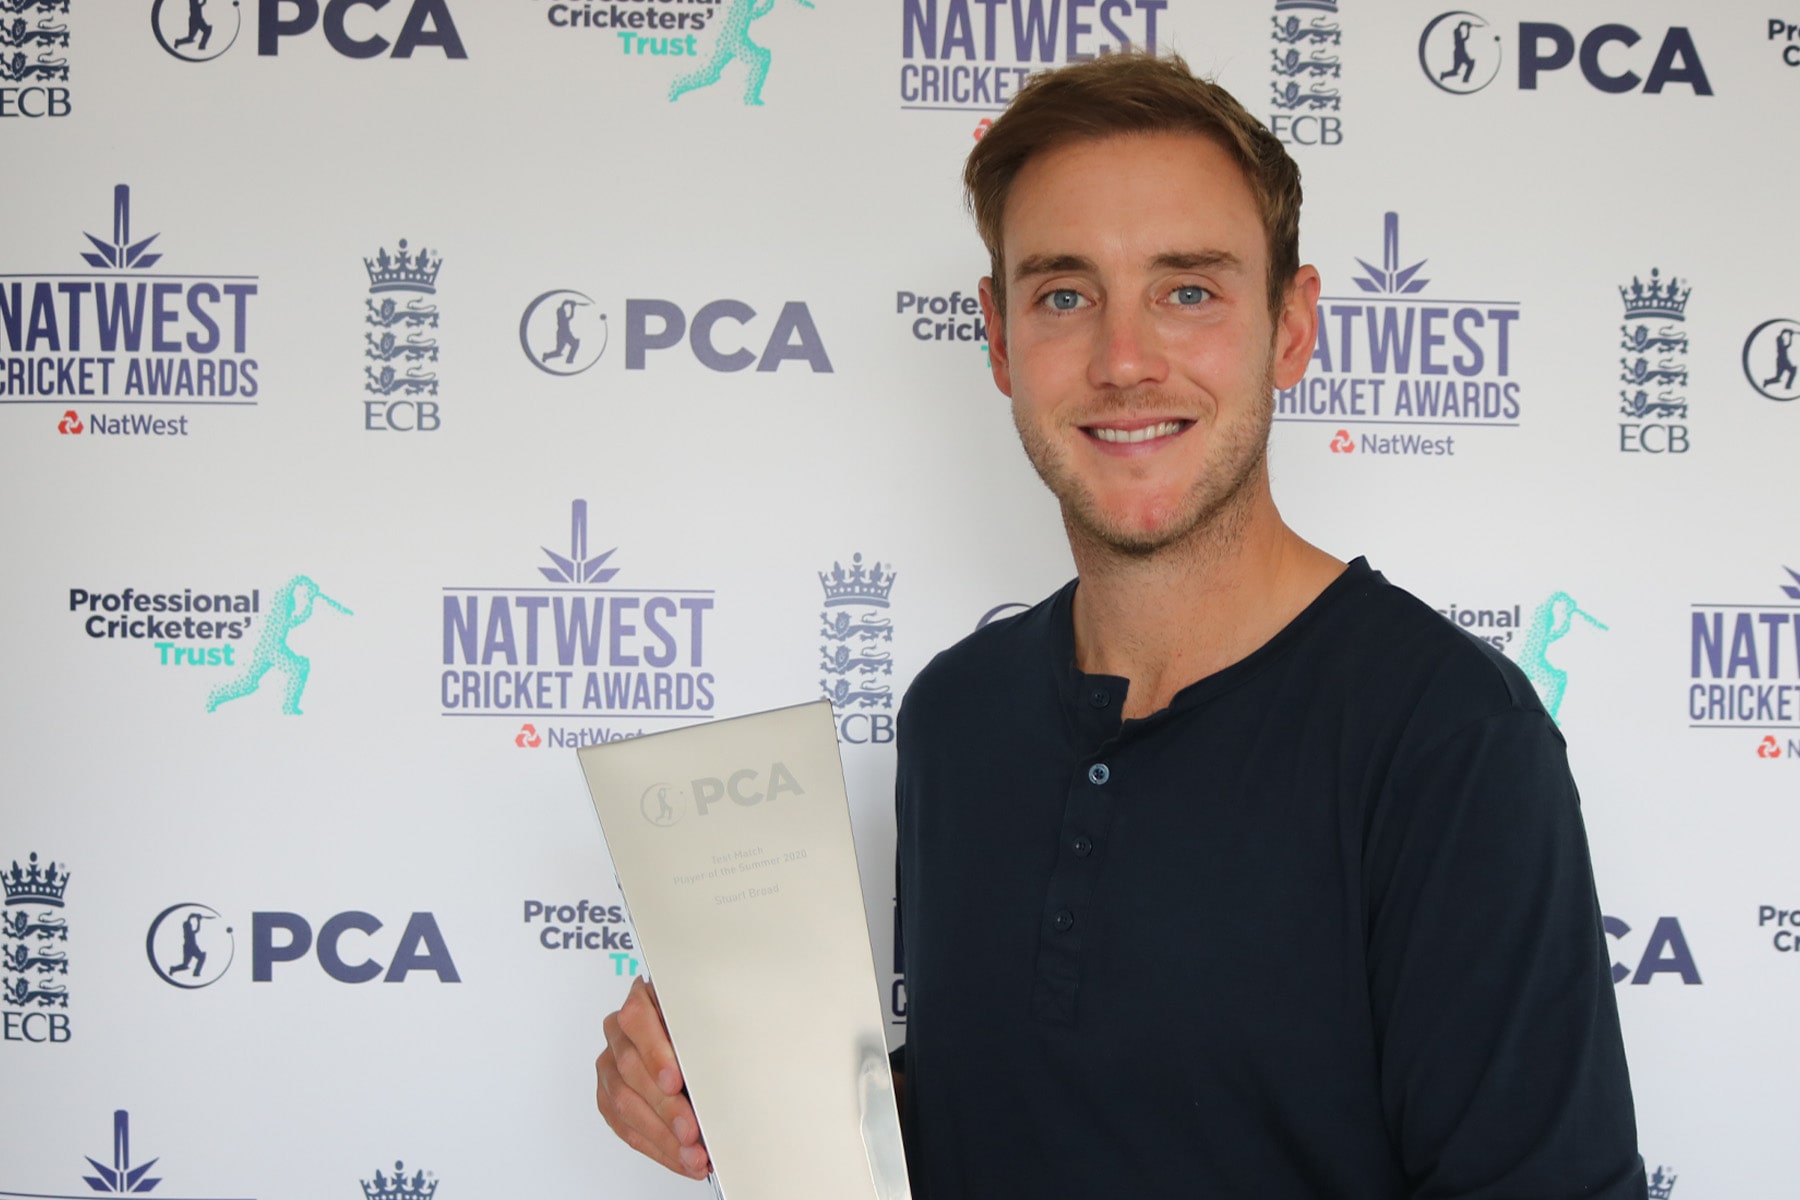 Broad motivated for more success